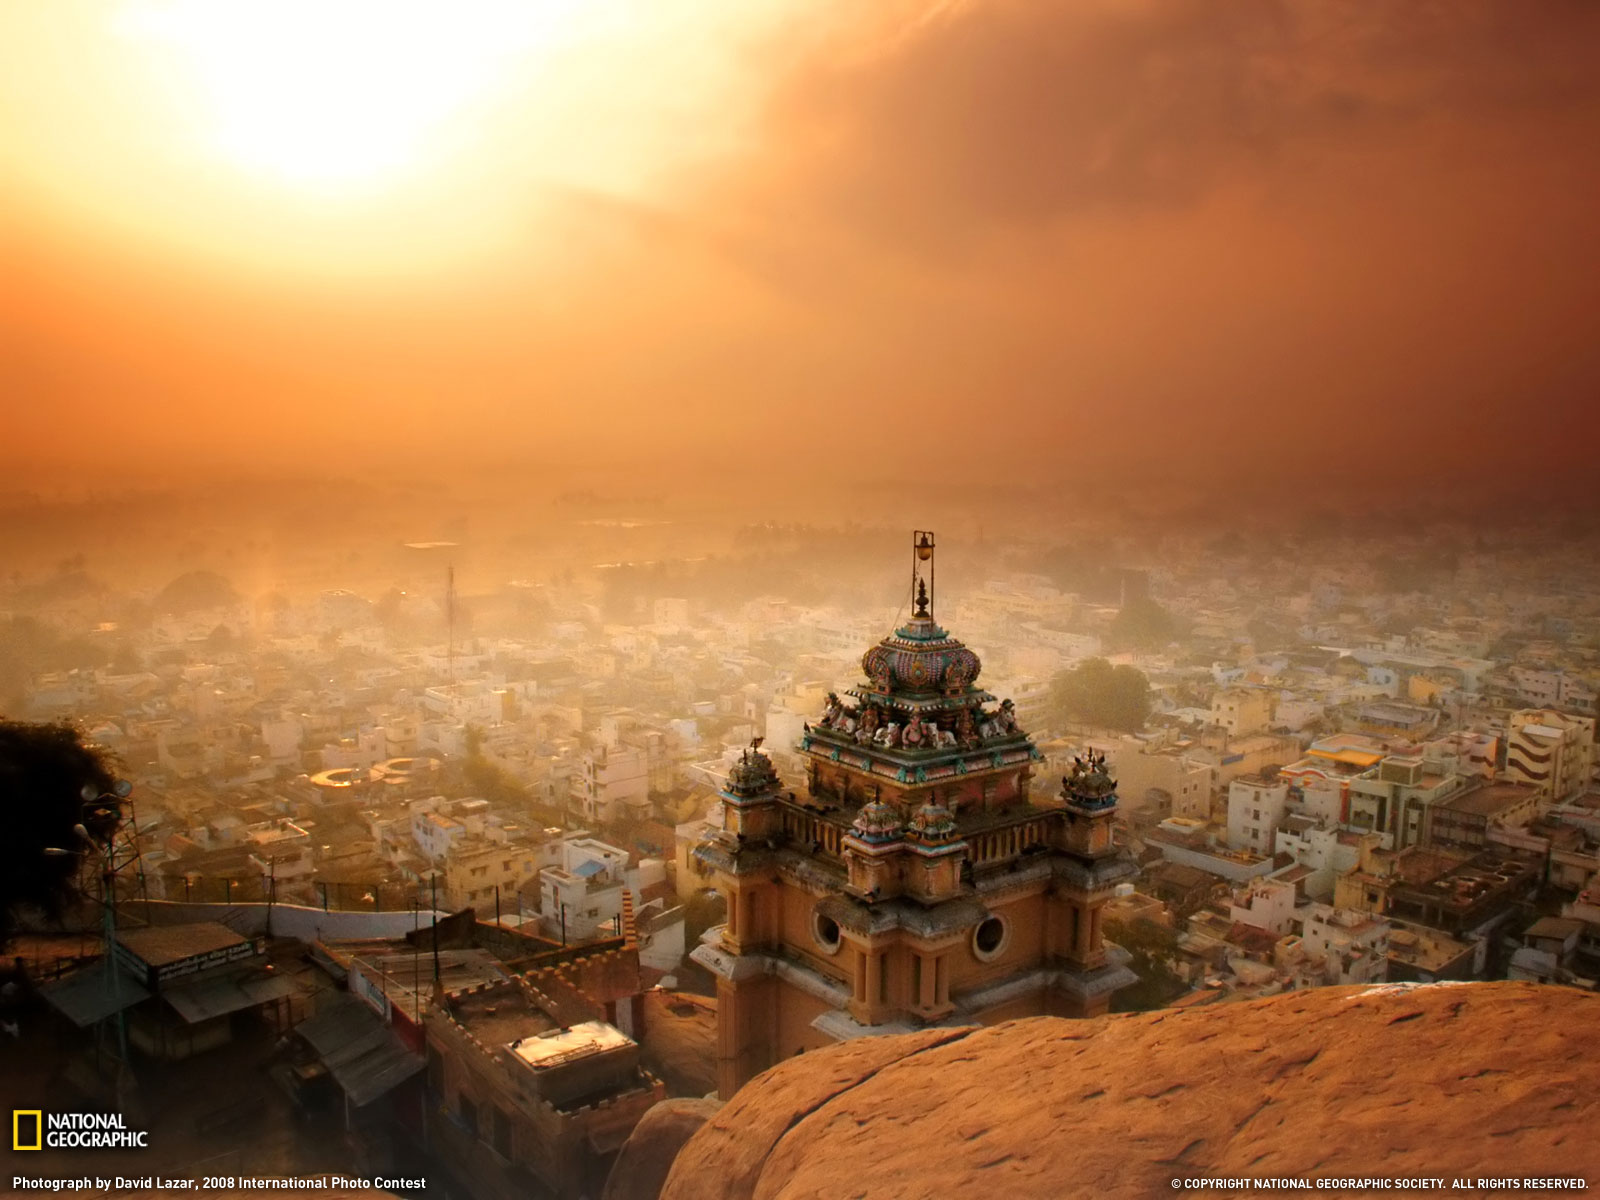 Rock Fort Picture India Wallpaper National Geographic Photo Of The